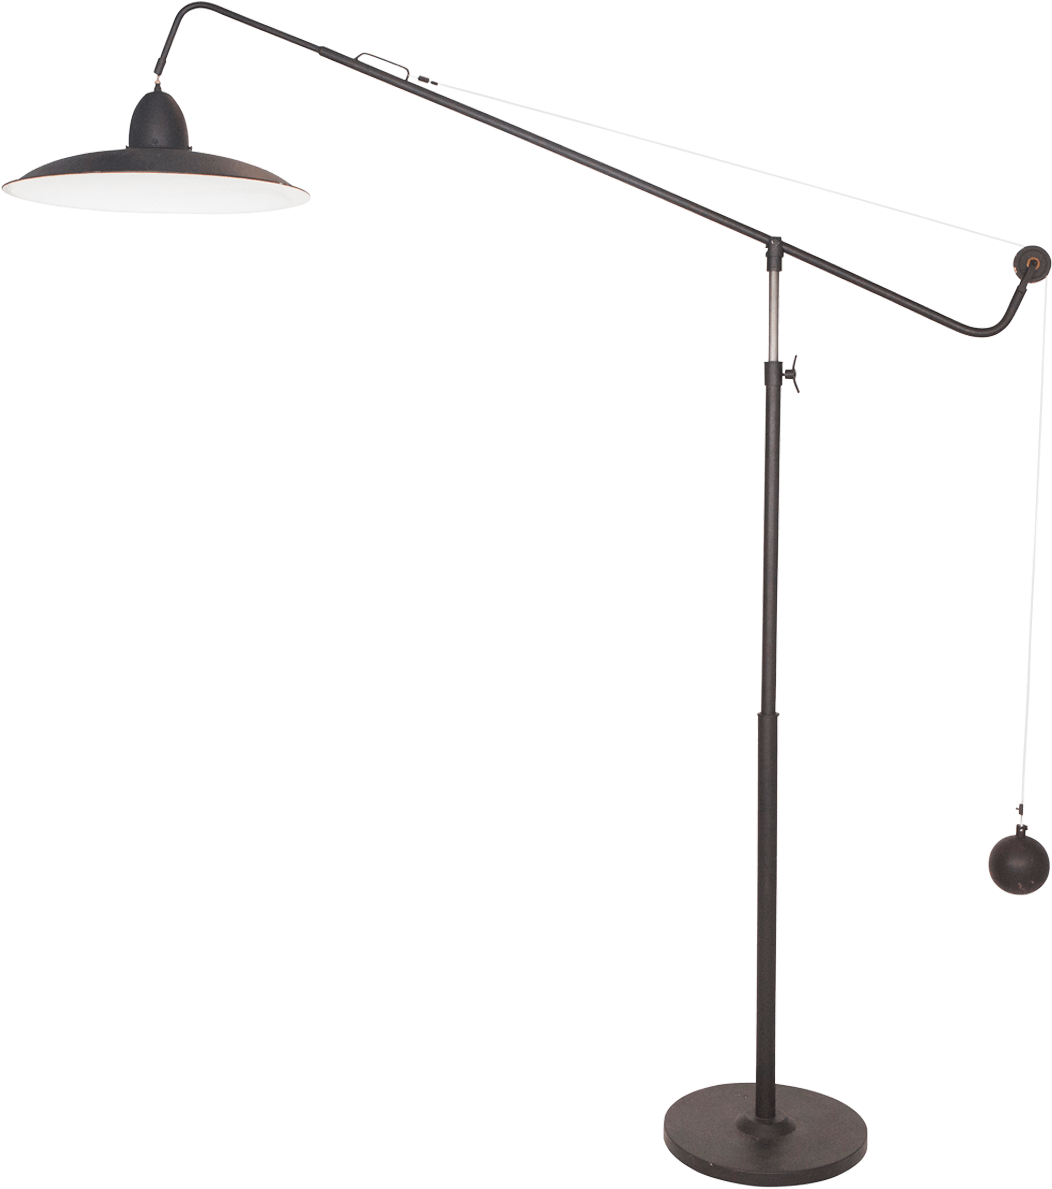 Lamp Office Floor HQ Image Free PNG Image